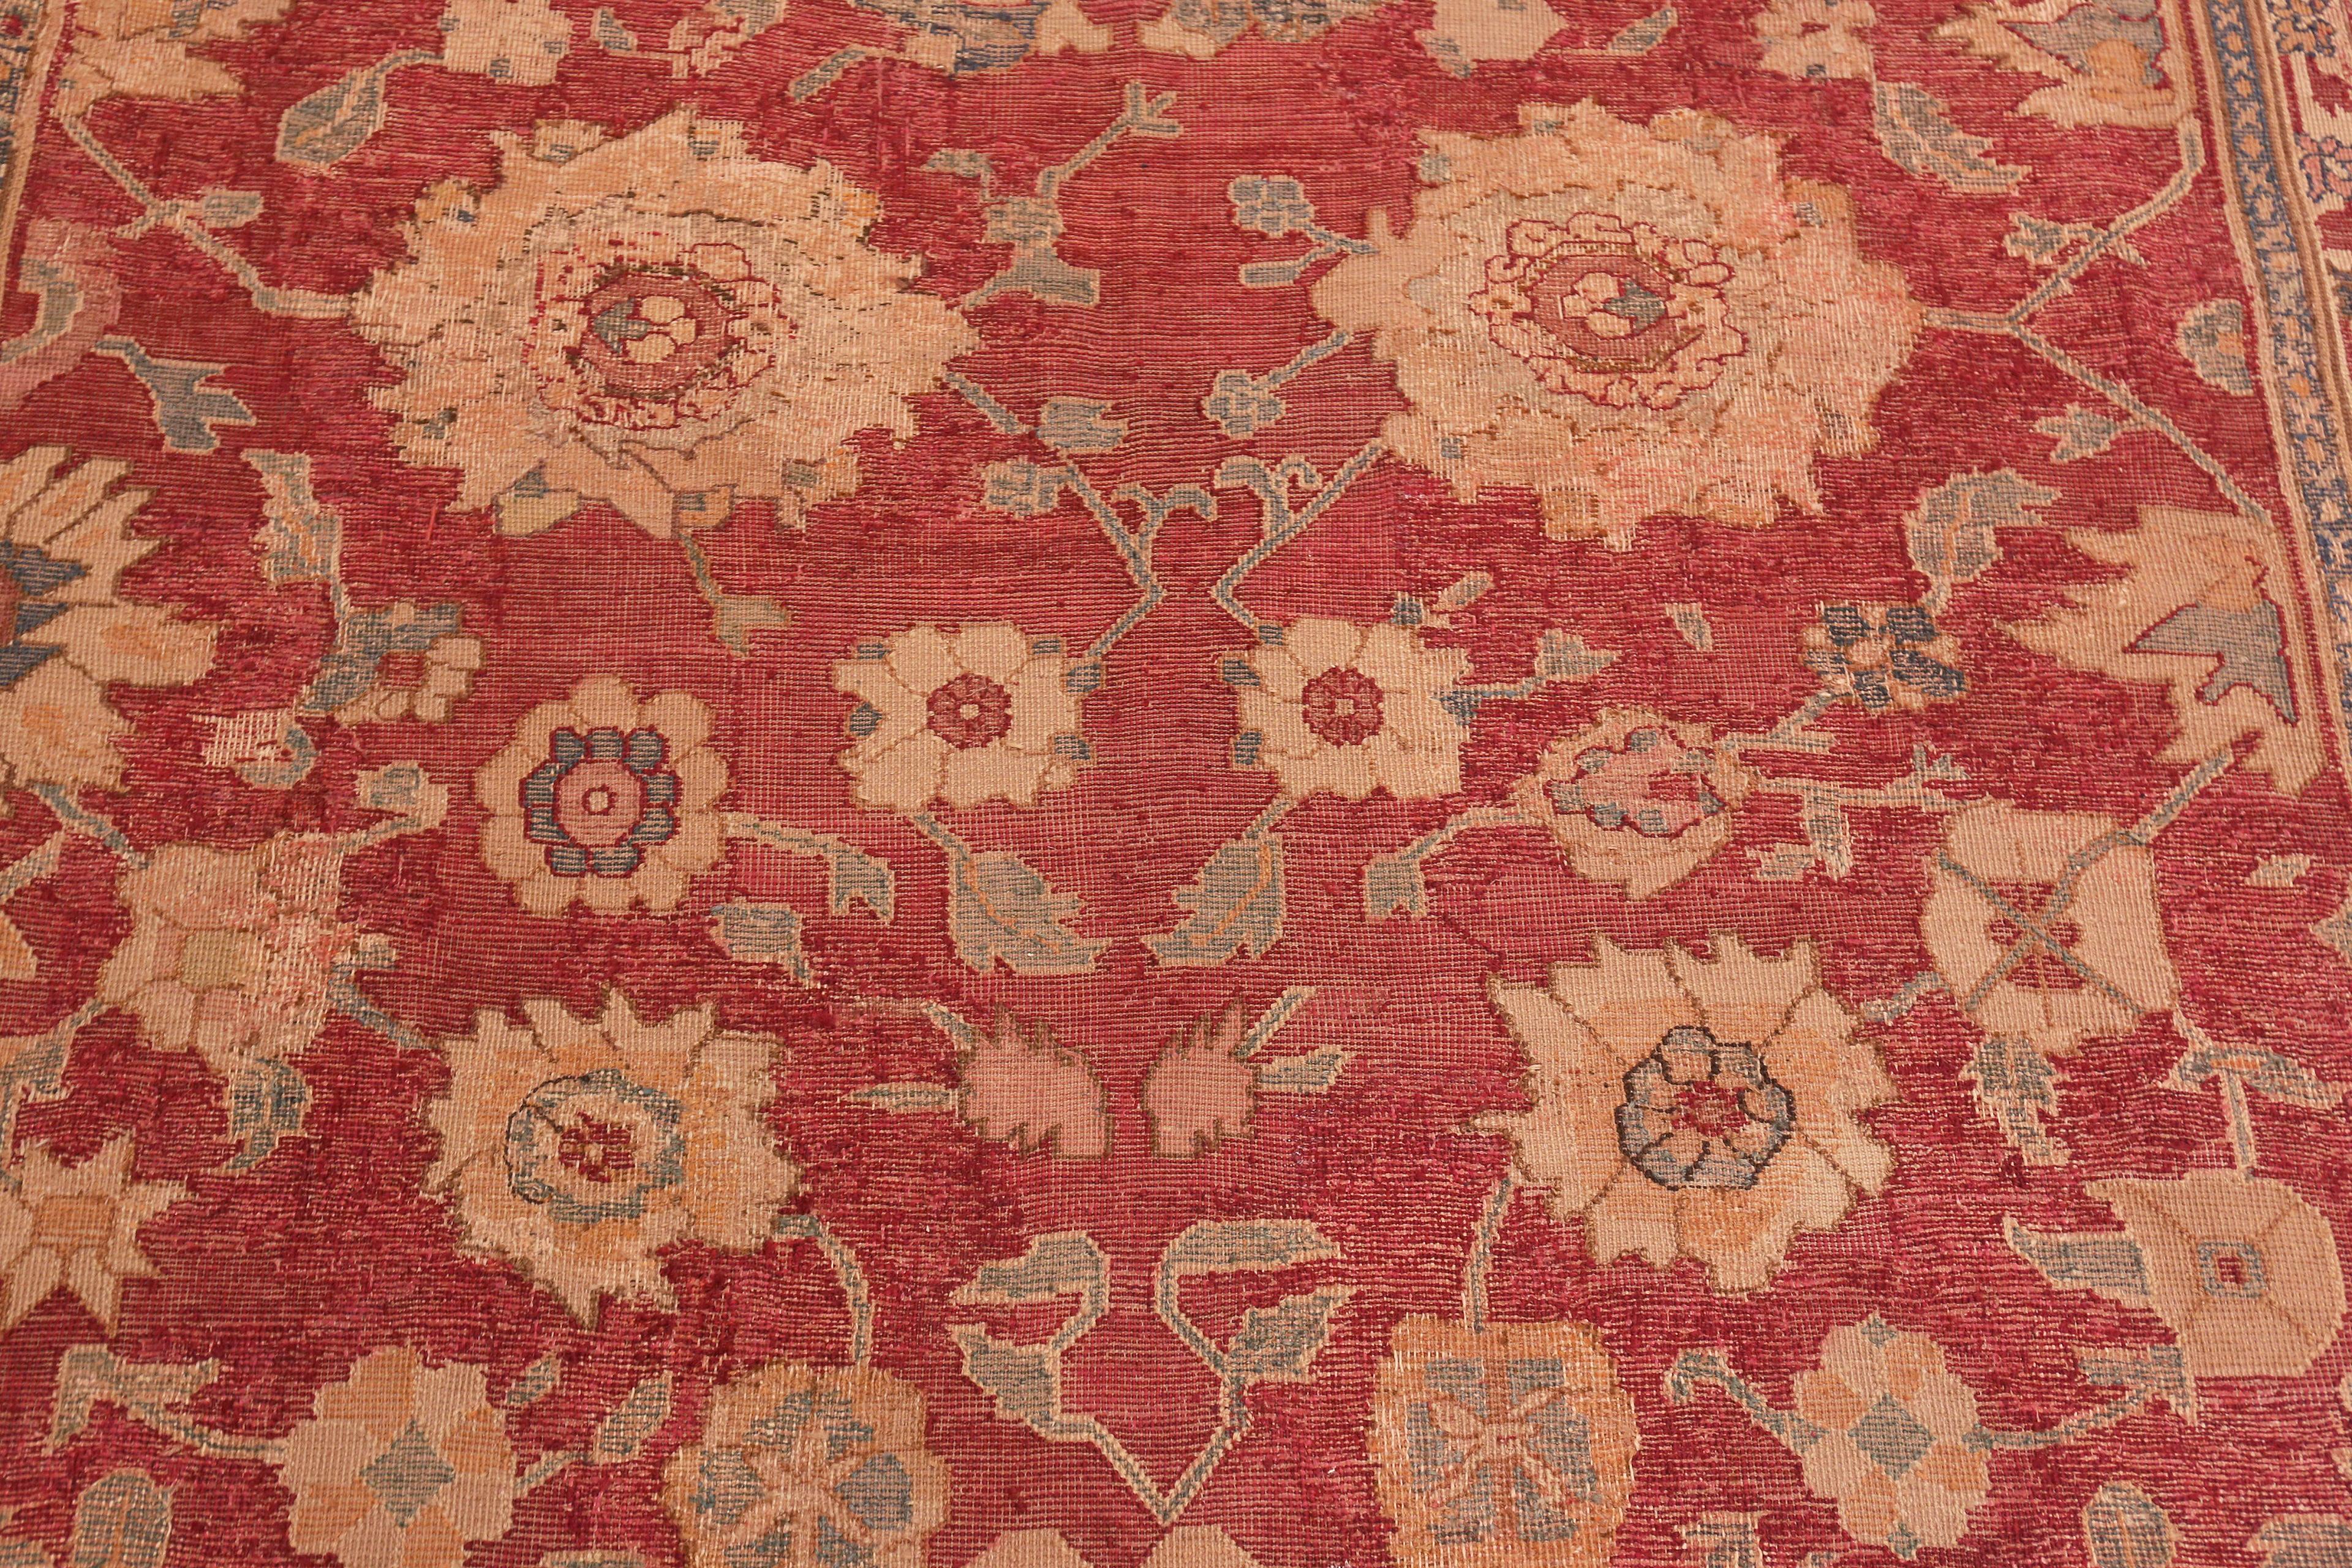 Agra 17th Century Antique Indian Mughal Rug 6 ft 7 in x 13 ft For Sale